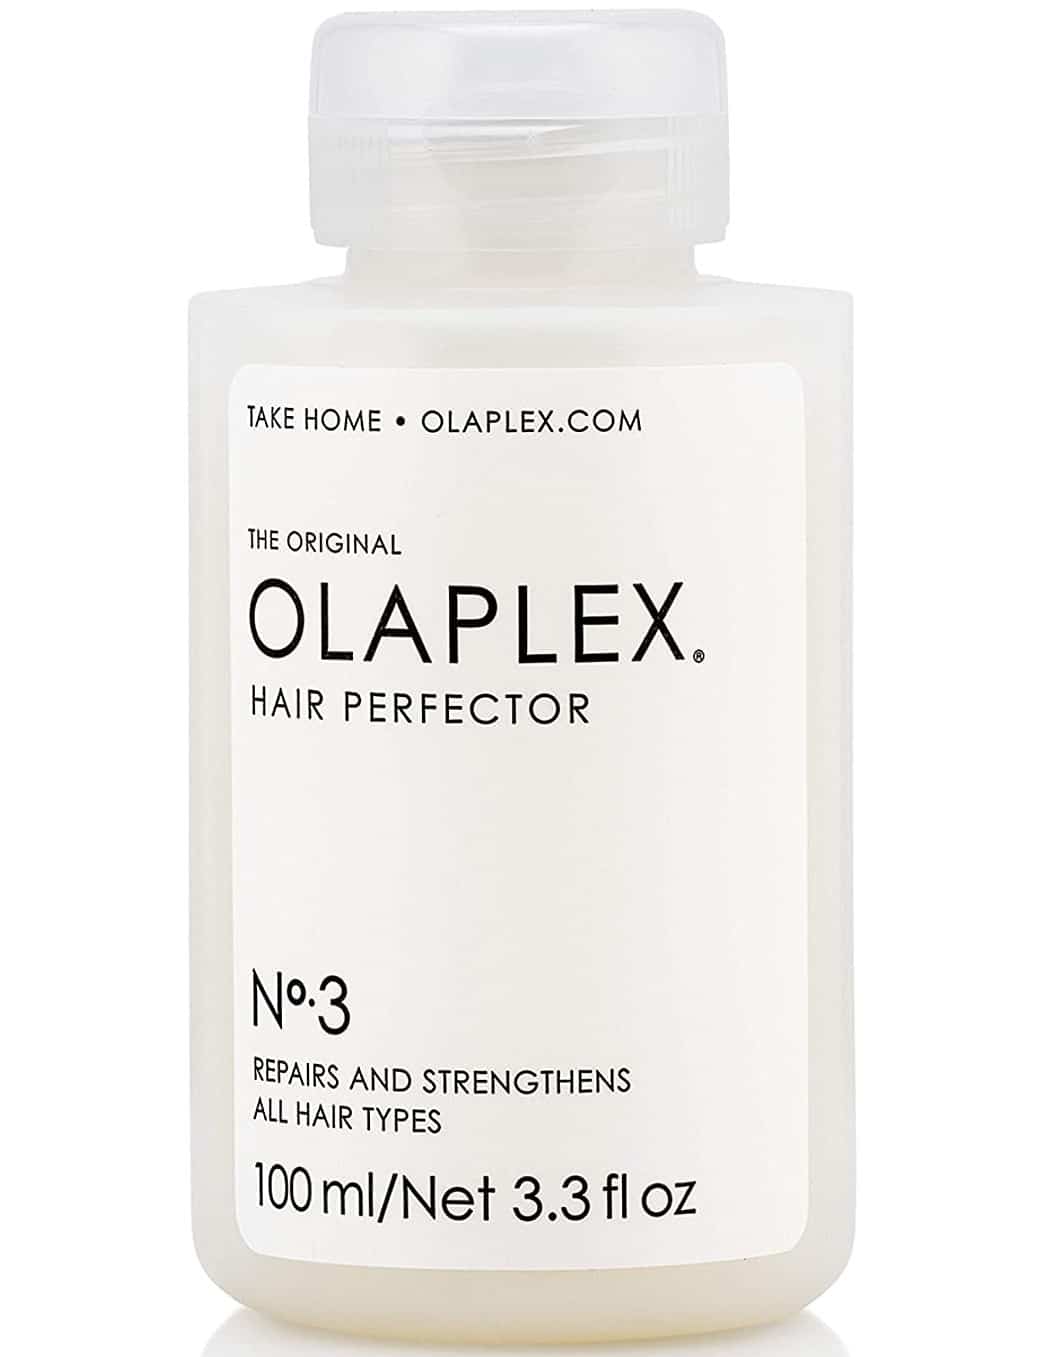 Olaplex No 3 Deep Conditioning Treatment for Blondes to Strengthen Hair